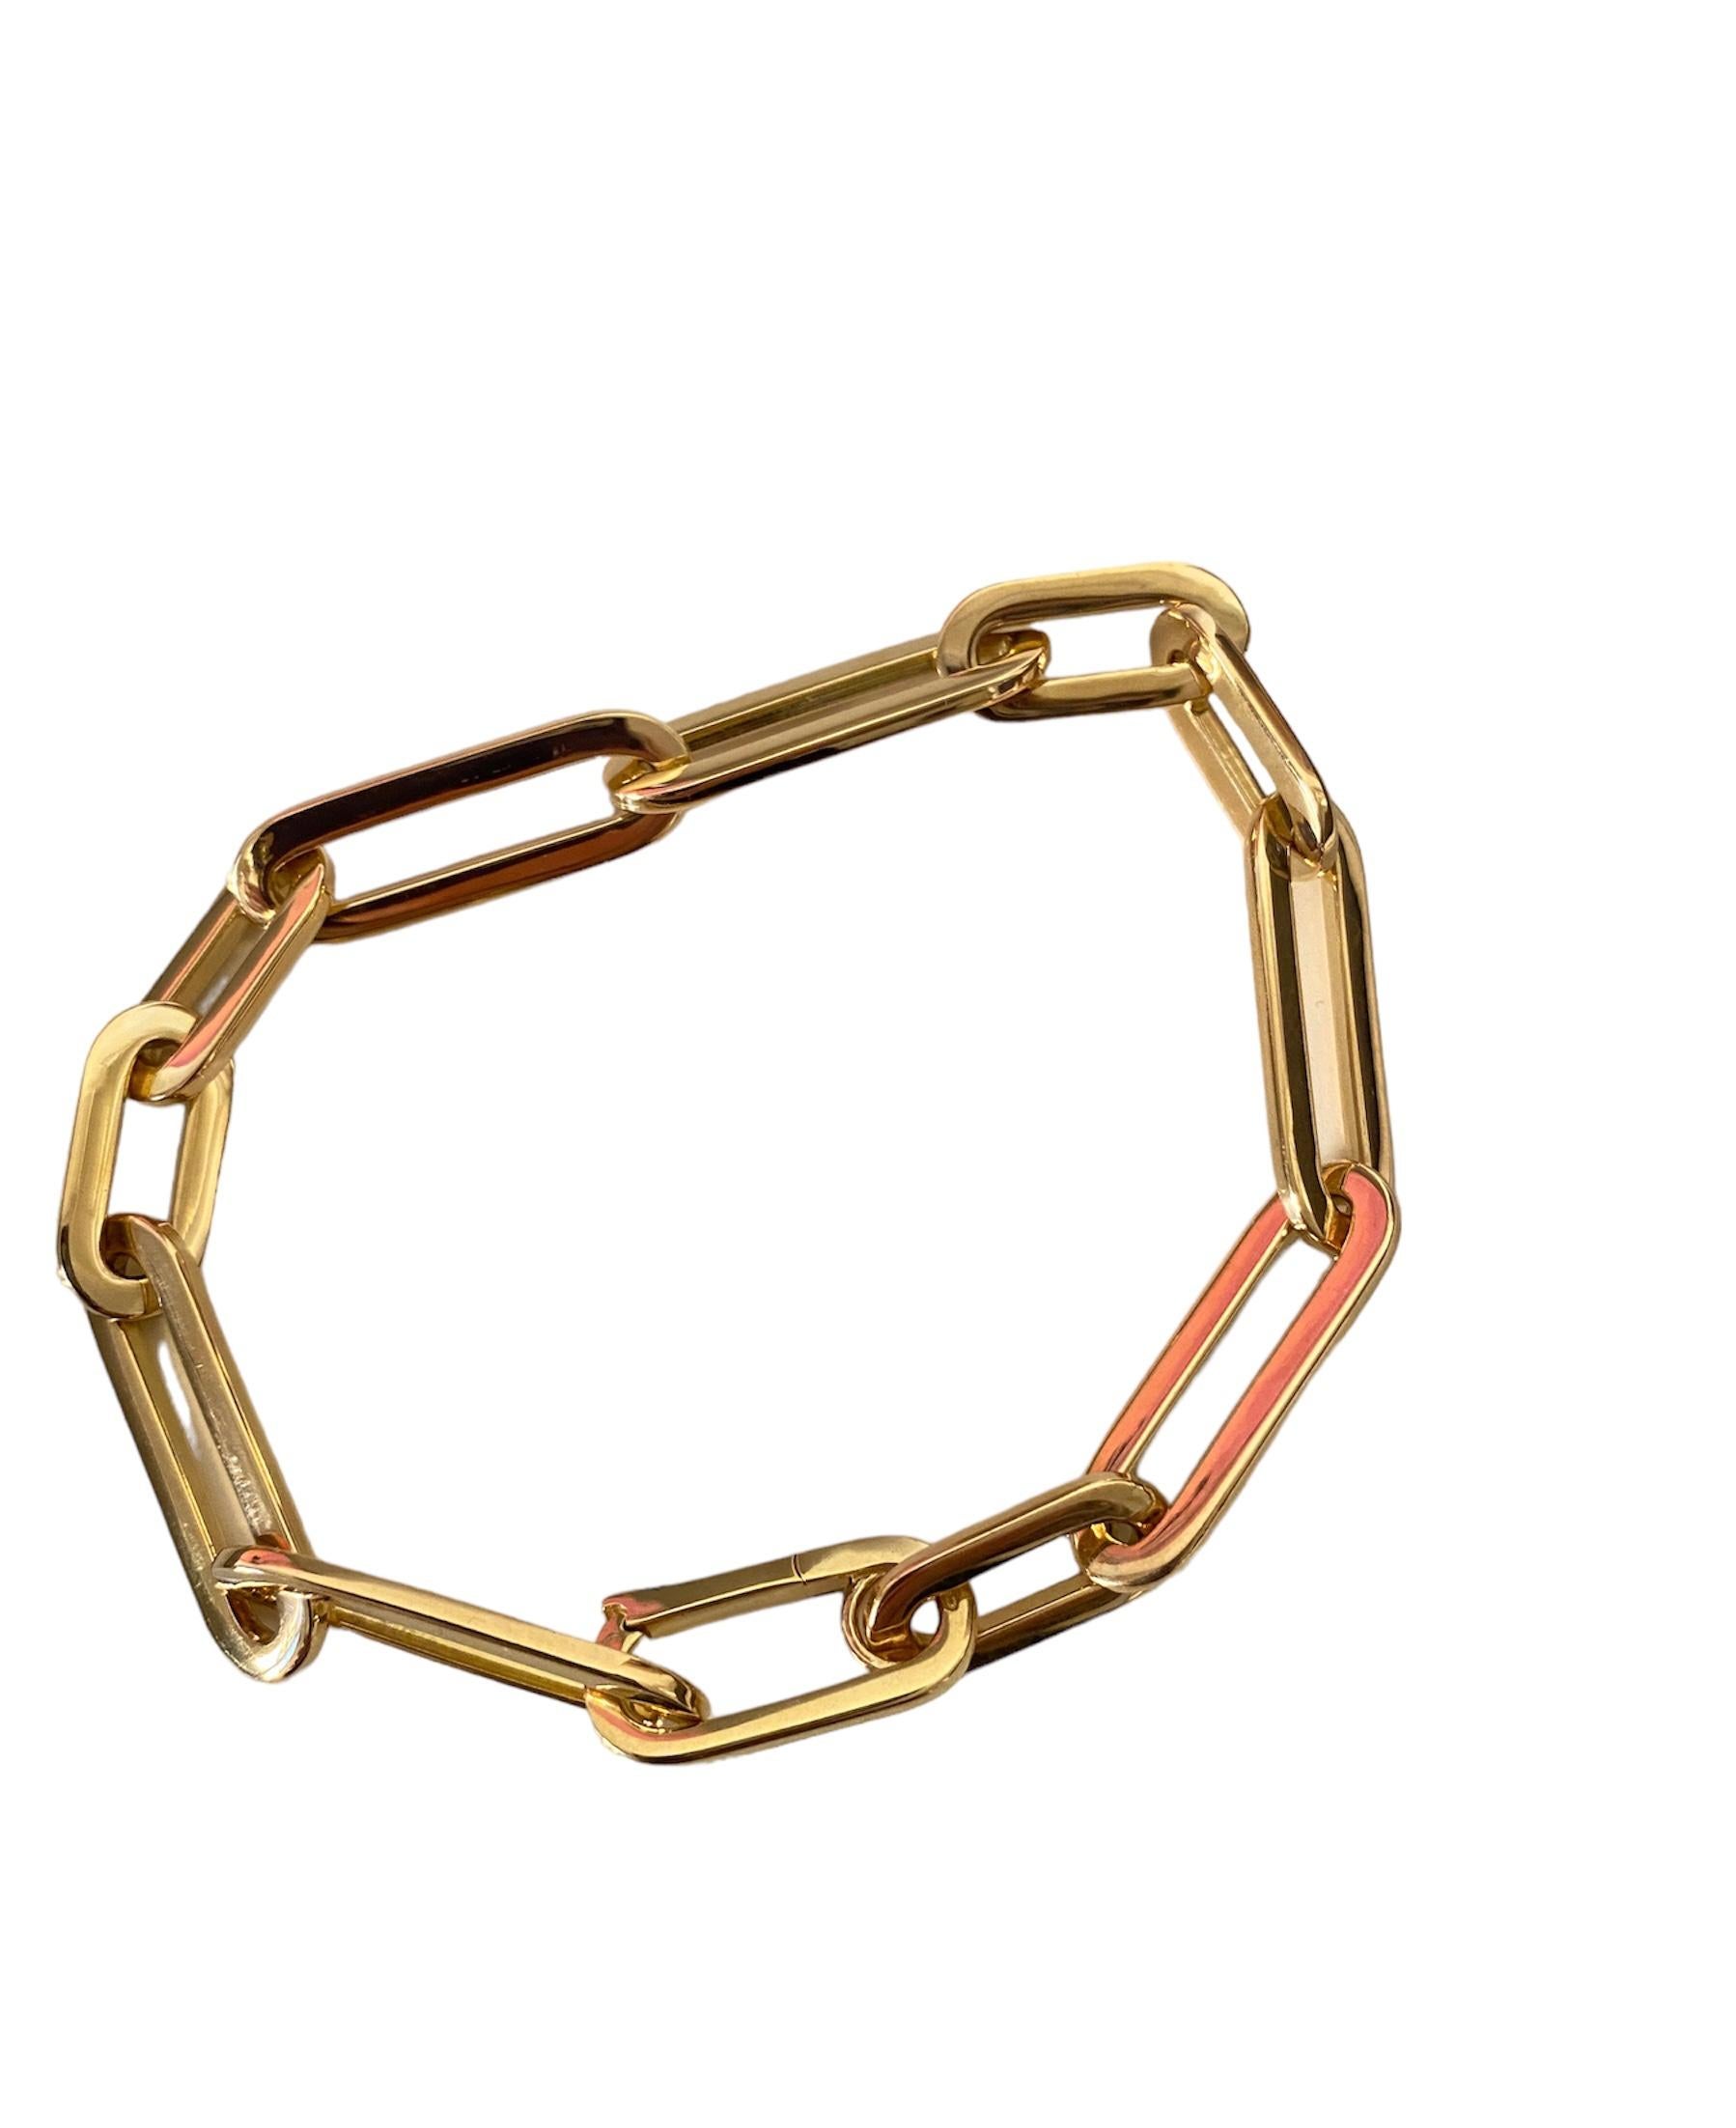 Ready to ship. Rossella Ugolini Design Collection Modern Unisex Link Chain Bracelet Handcrafted in Italy.
This 18K Yellow Gold bracelet is special because the clasp has the same oval shape and blends in with the chain. Its modern unisex shape makes